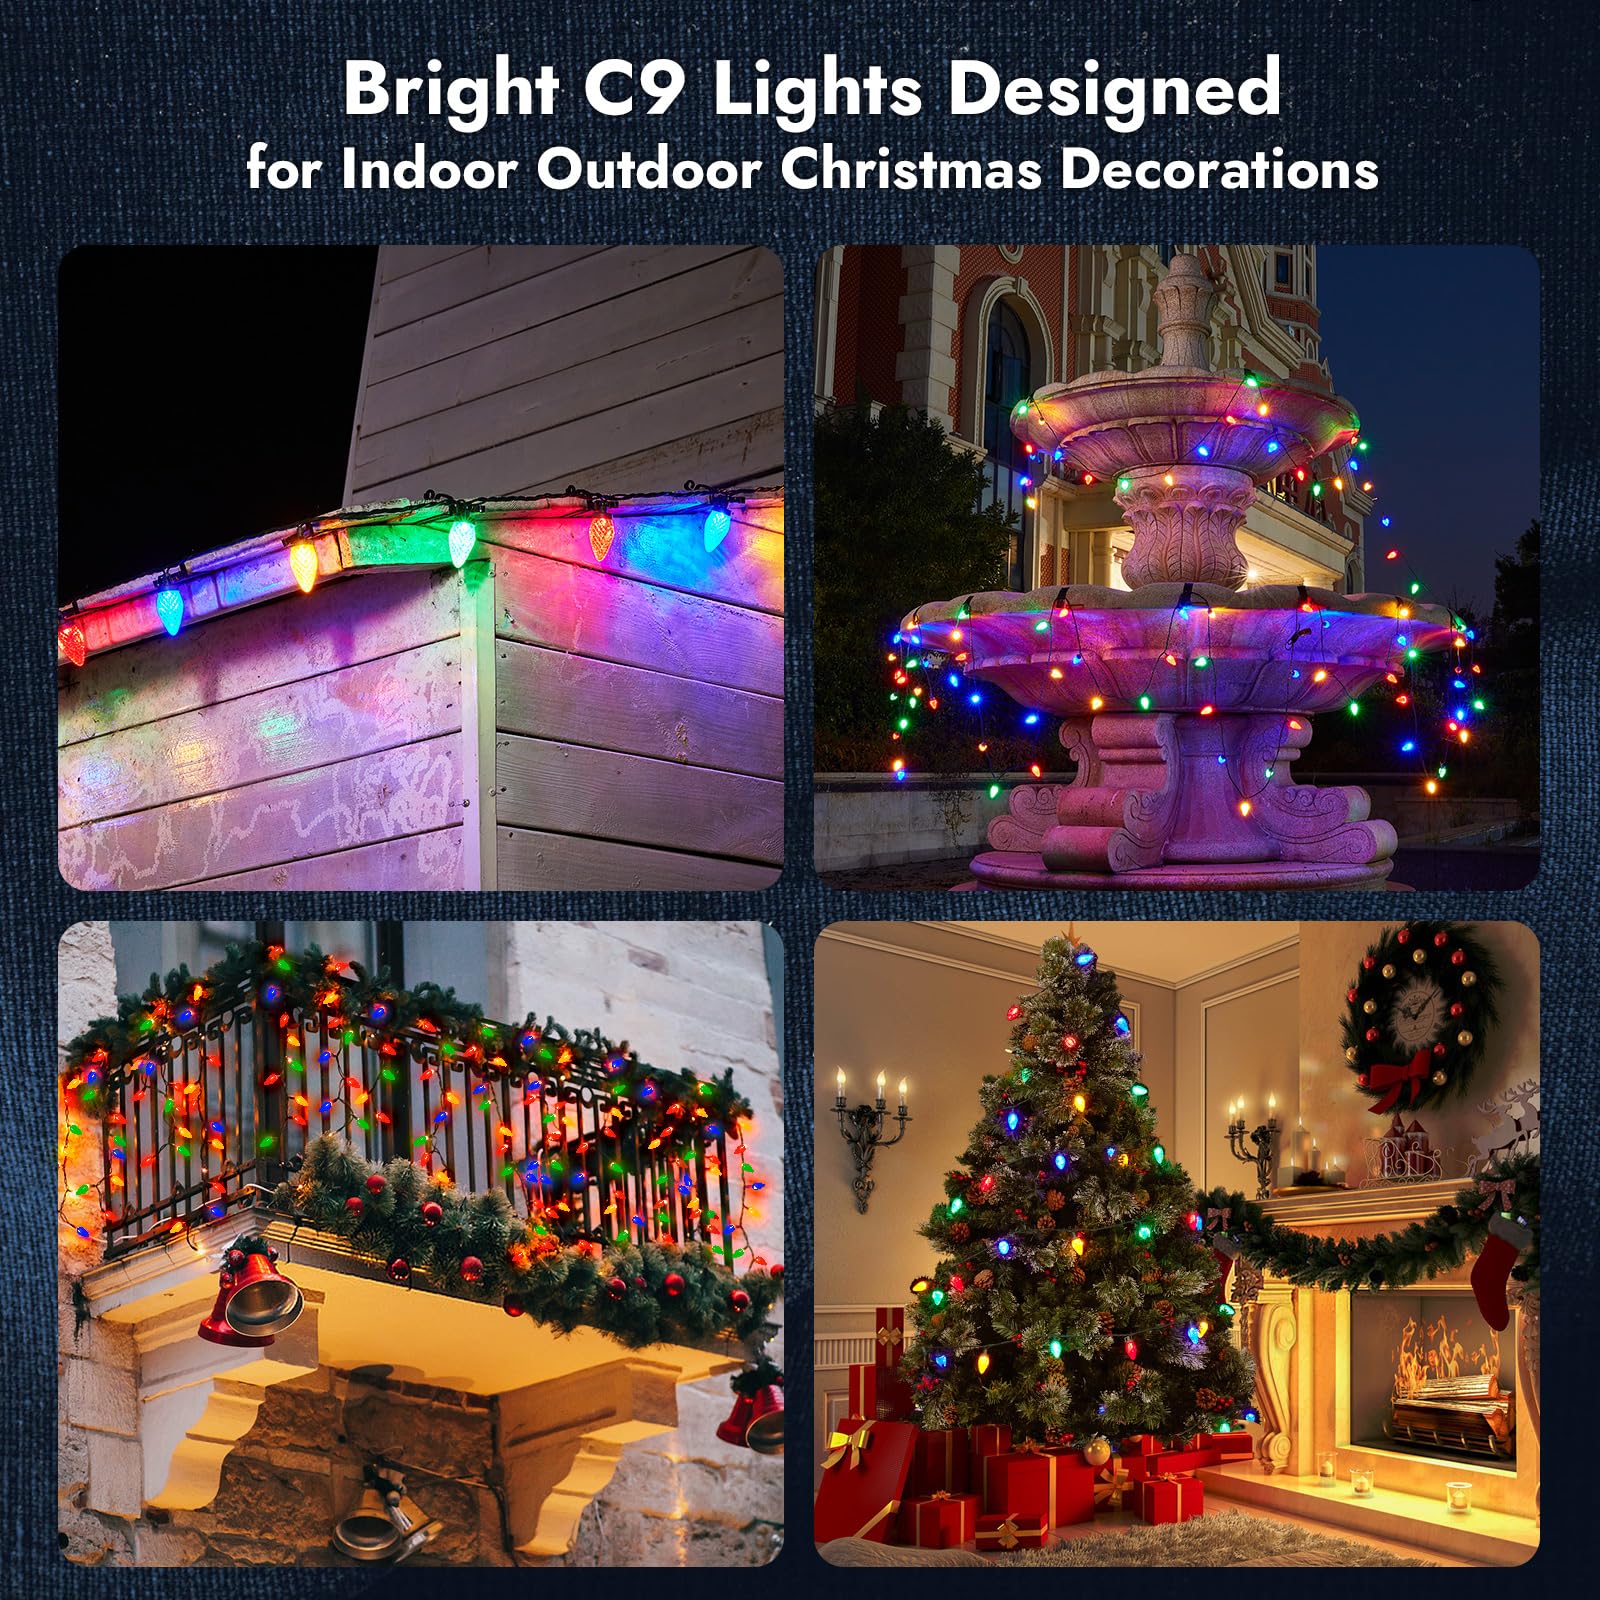 Dirnun C9 Led Christmas Lights Outdoor Christmas Decorations Commerical Grade 50Led 33ft Christmas Tree Lights Set for Indoor Outdoor Wedding, Holiday, Party, Home Christmas Decorations(Multicolor)